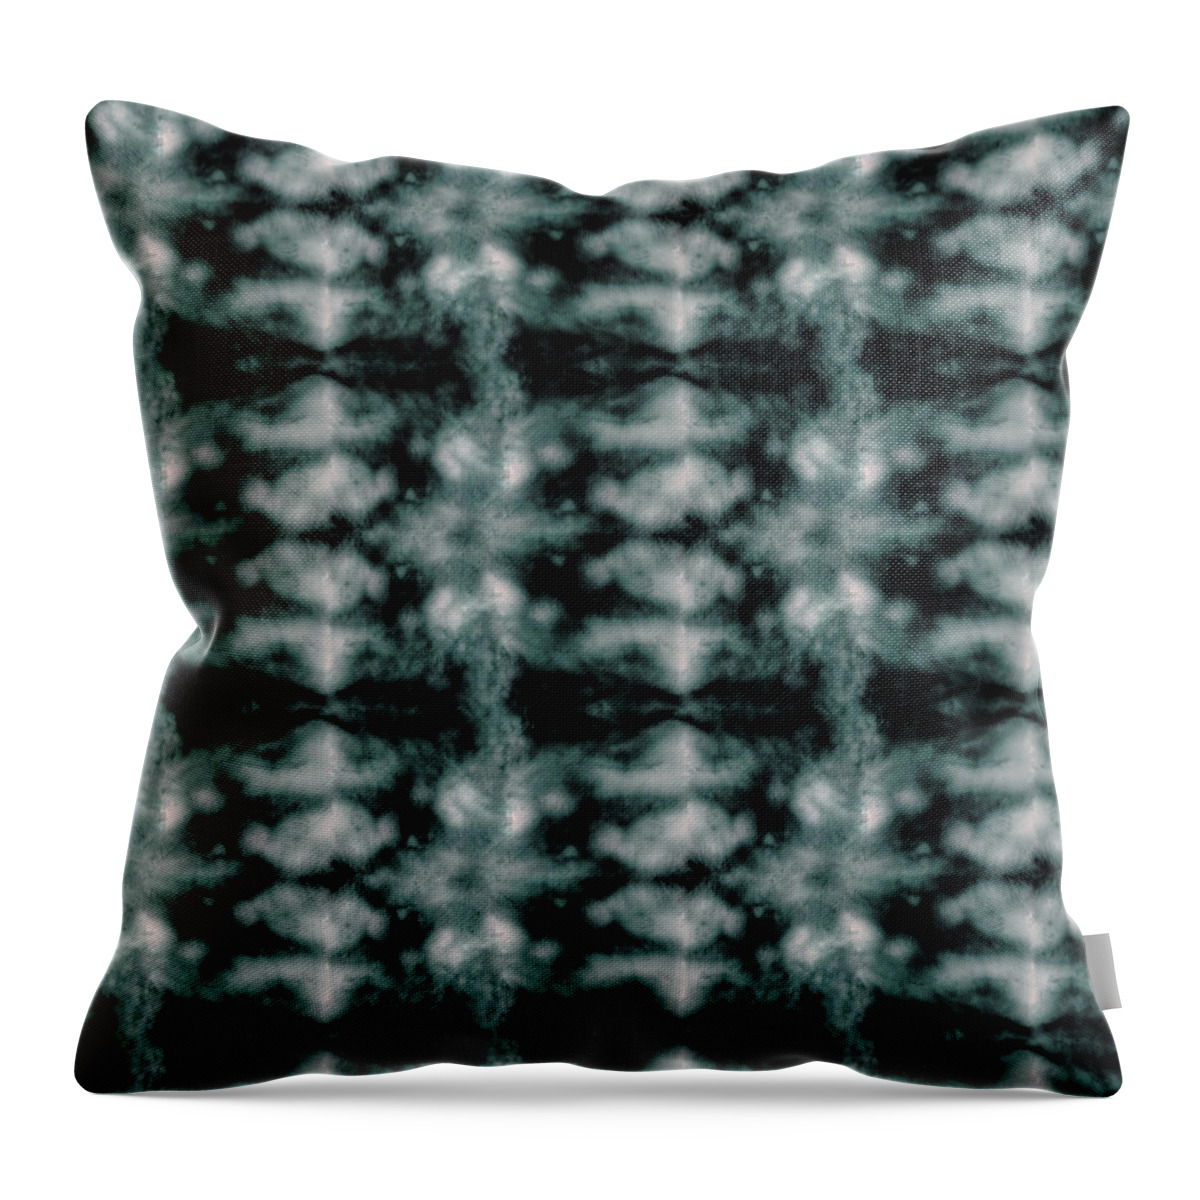 Shibori Throw Pillow featuring the digital art Teal Shibori Dyed Pattern by Sand And Chi